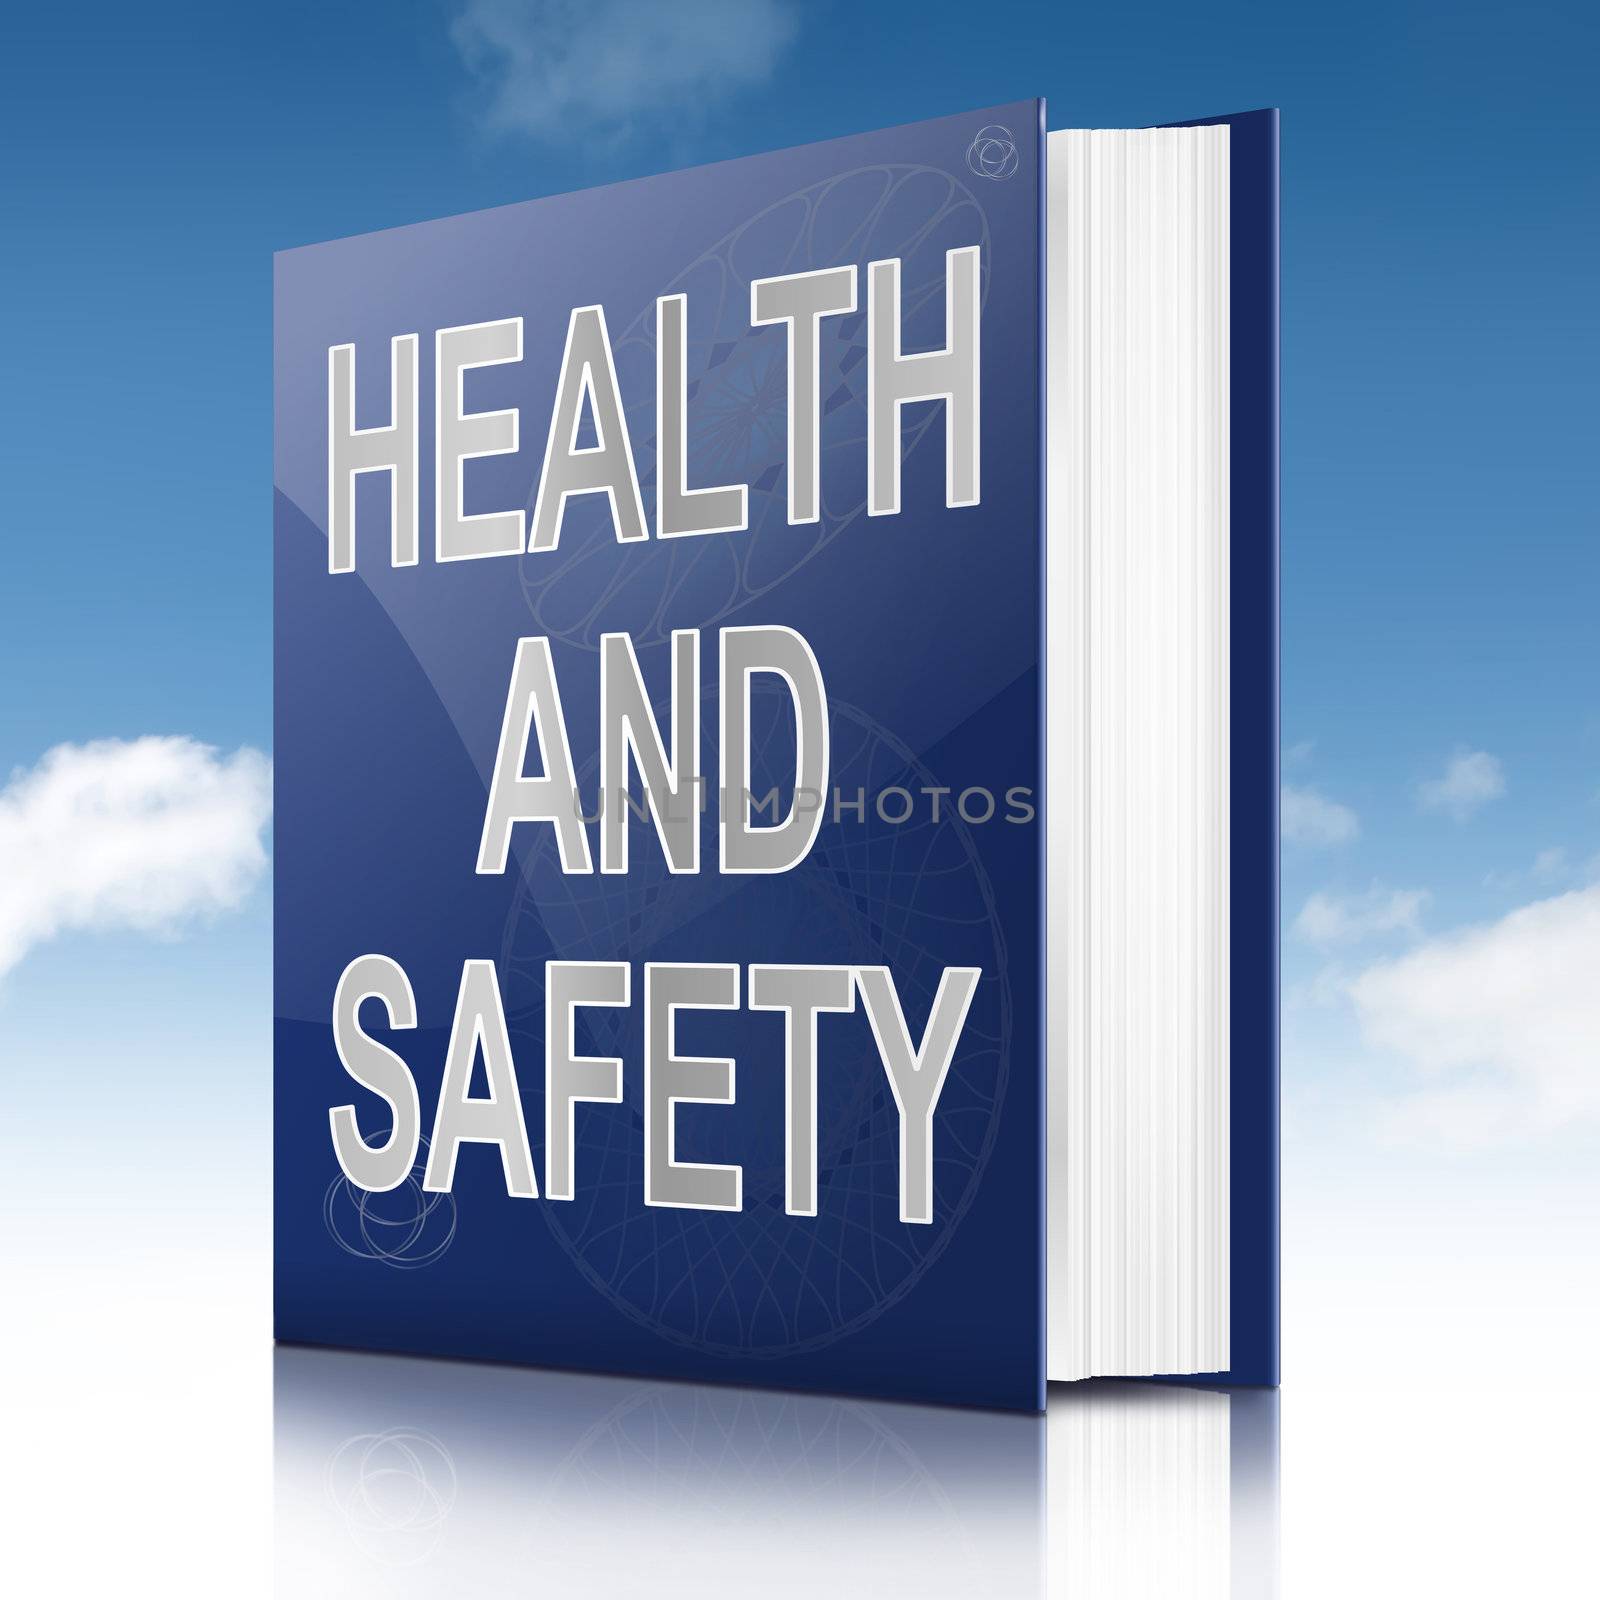 Health and safety text book. by 72soul